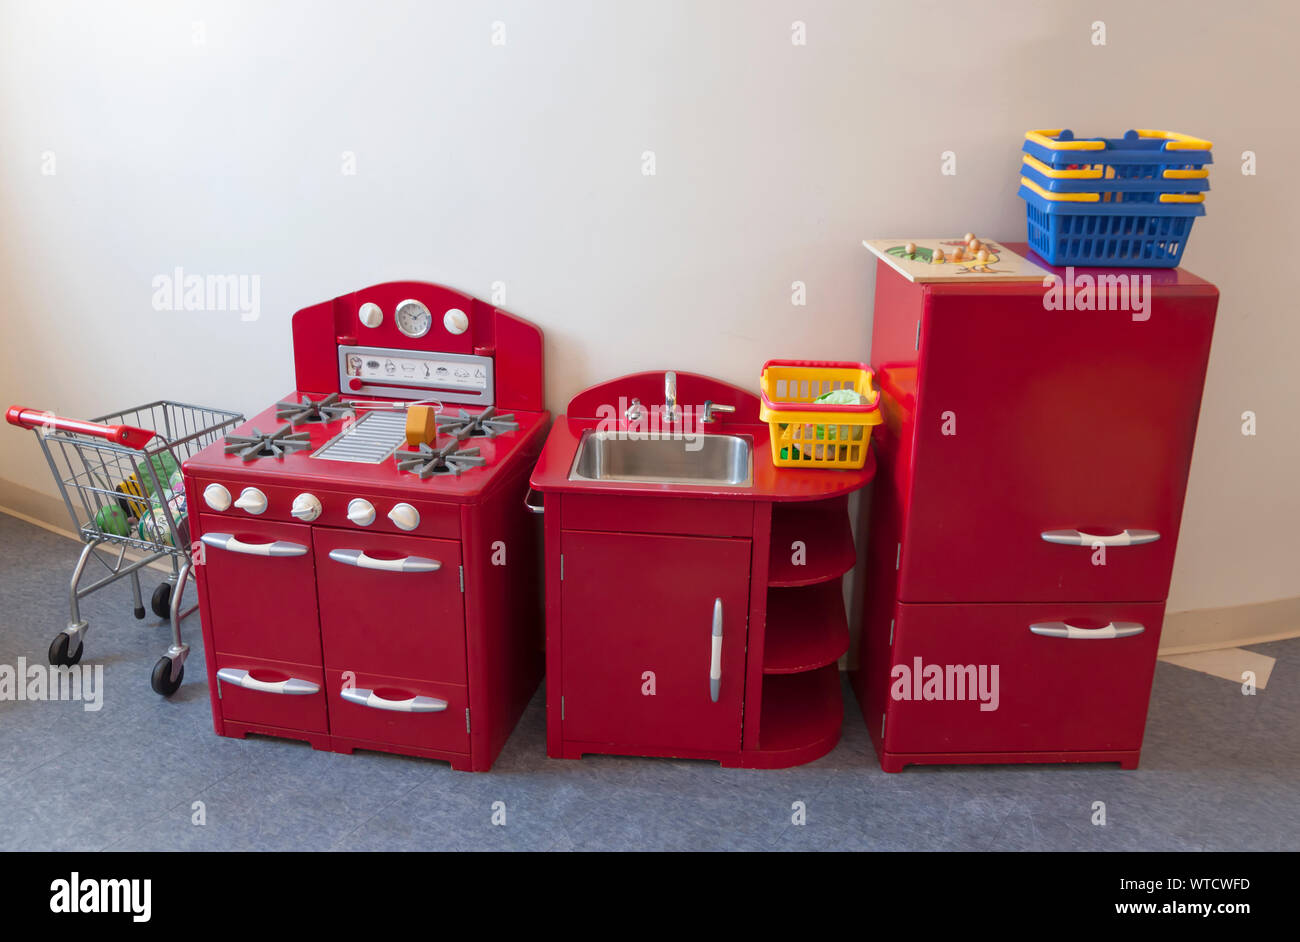 Shopping cart, stove, oven, sink, refrigerator toys for children. Stock Photo